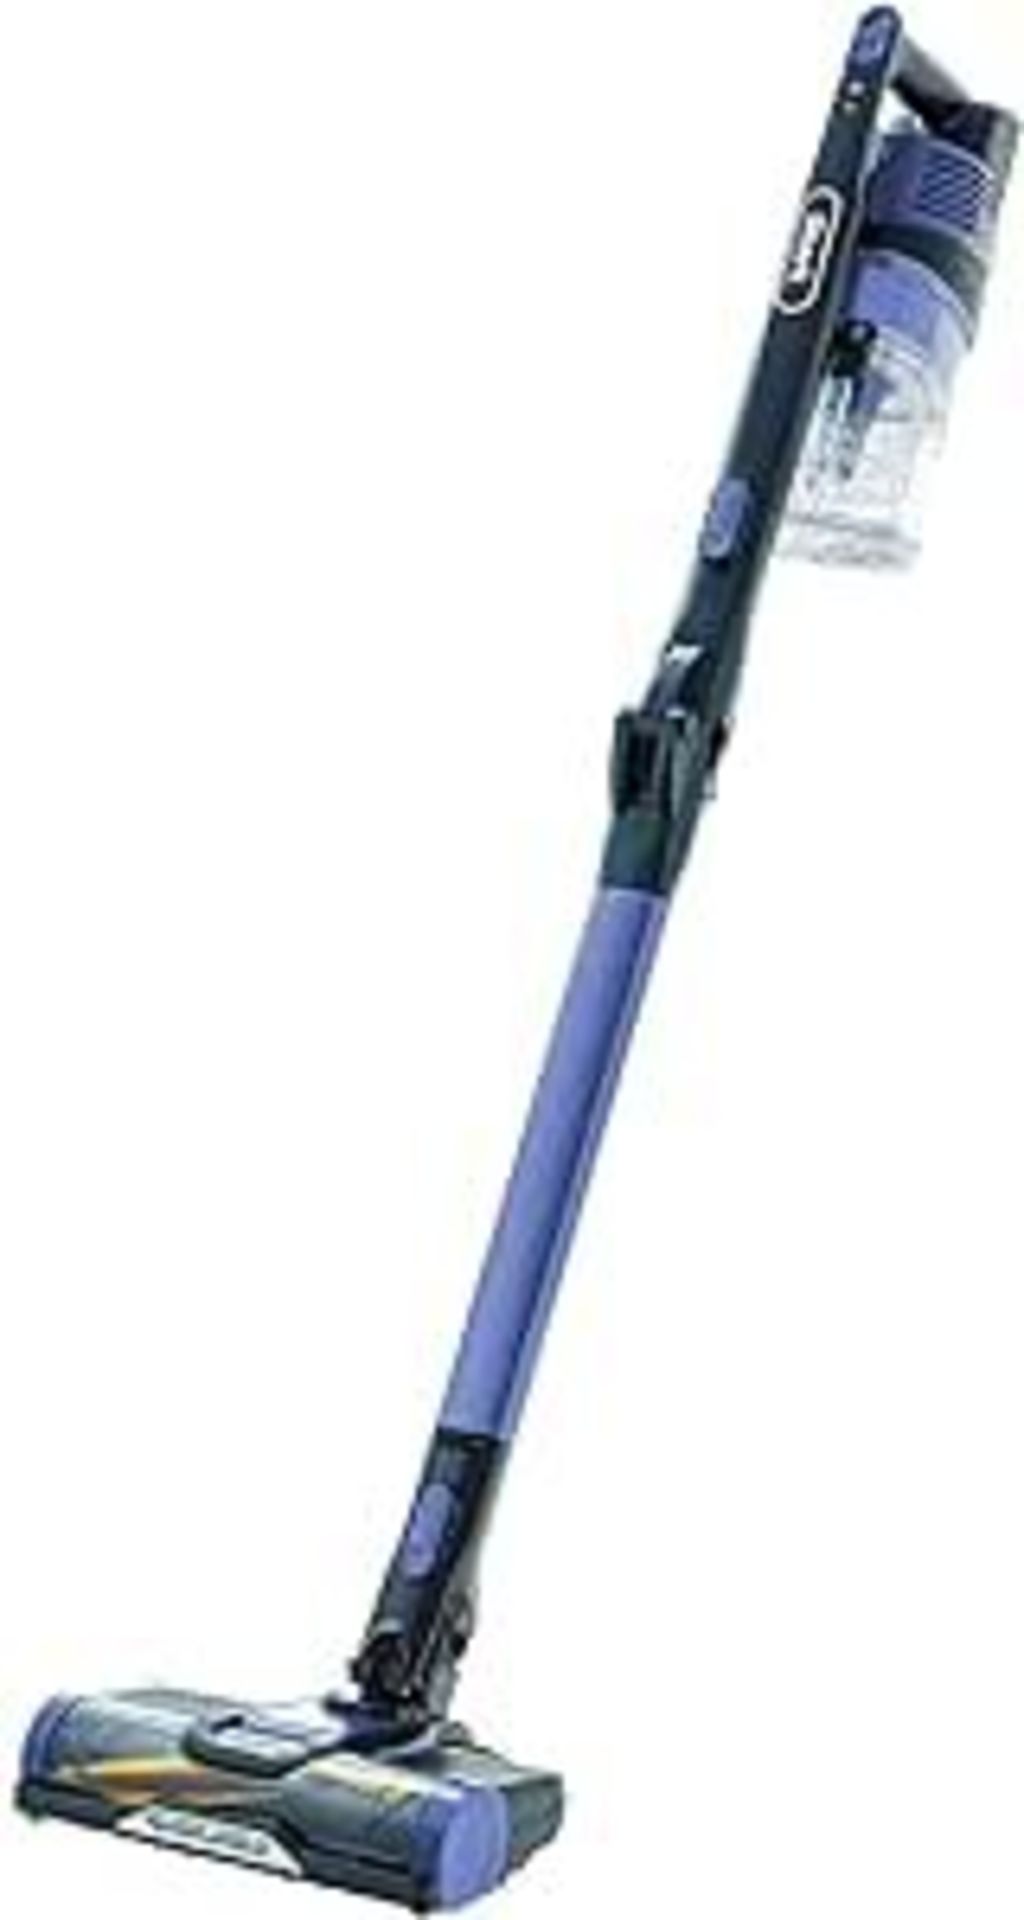 Shark Cordless Stick Vacuum Cleaner - EBR3. RRP £299.99. with Anti Hair Wrap, Up to 40 mins run-